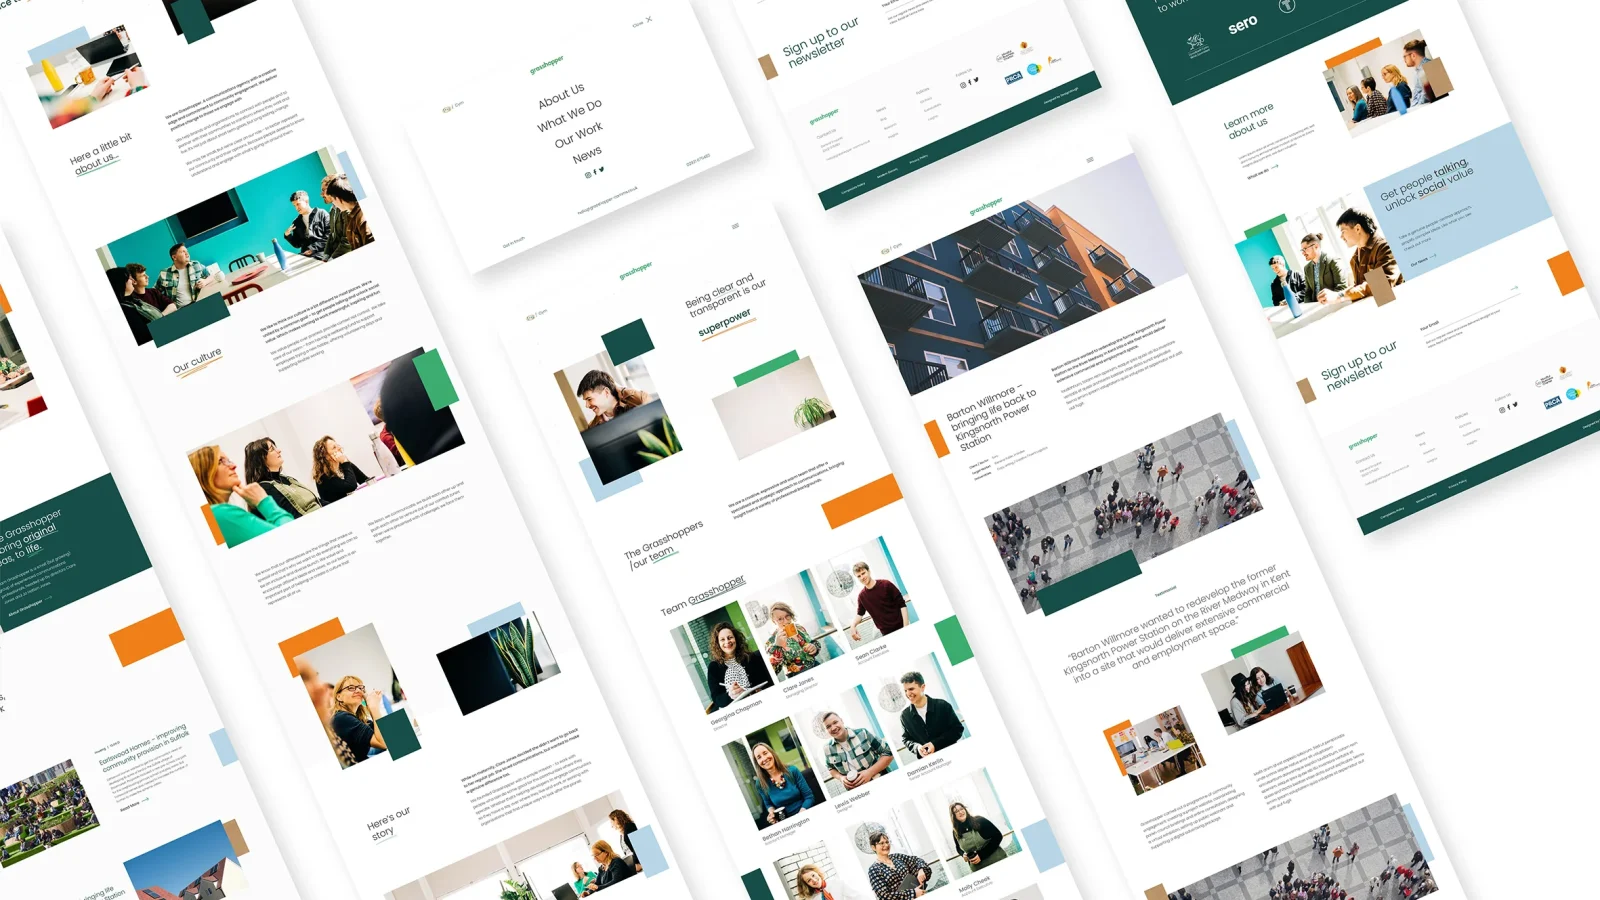 A collage of various website designs, featuring clean layouts with text, images of people in business and casual settings, and diverse color schemes. the examples focus on user interface elements and branding.